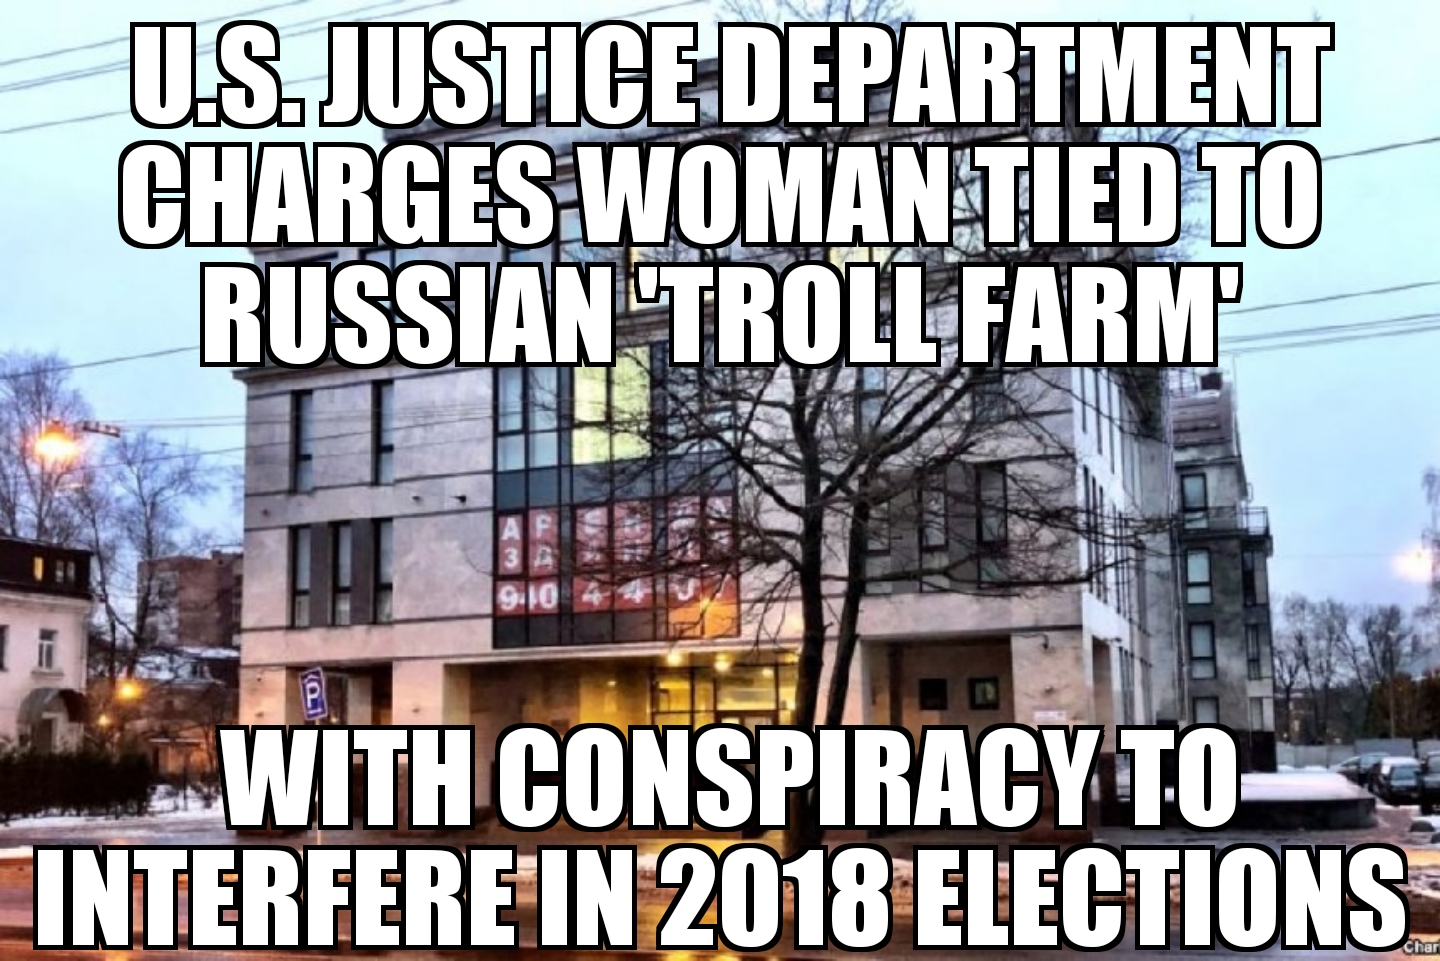 Russian charged with conspiracy to interfere in 2018 U.S. elections